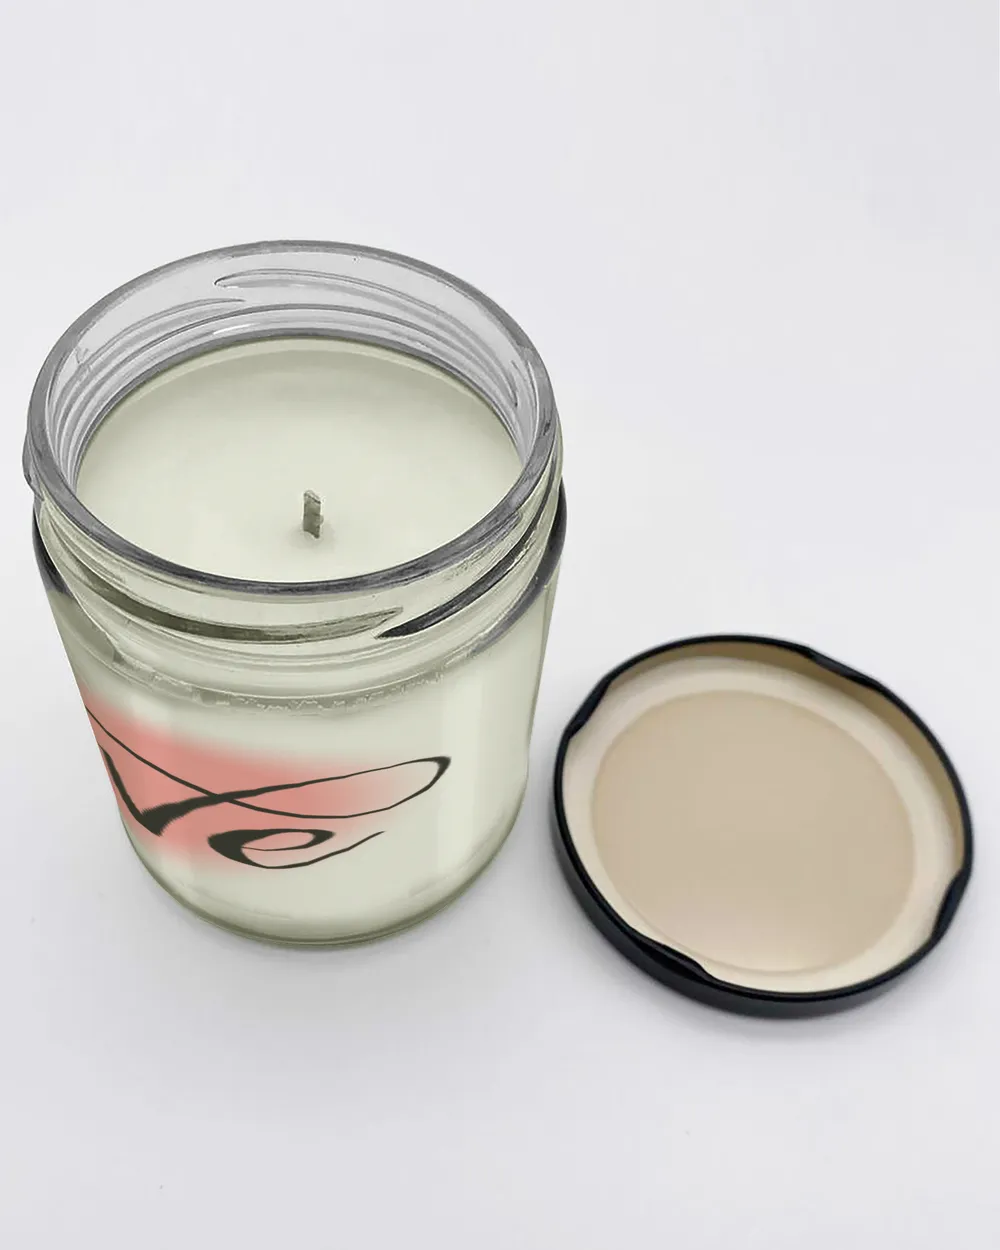 Light the Love: Ignite Warmth and Comfort with Our Adorable Love Candles